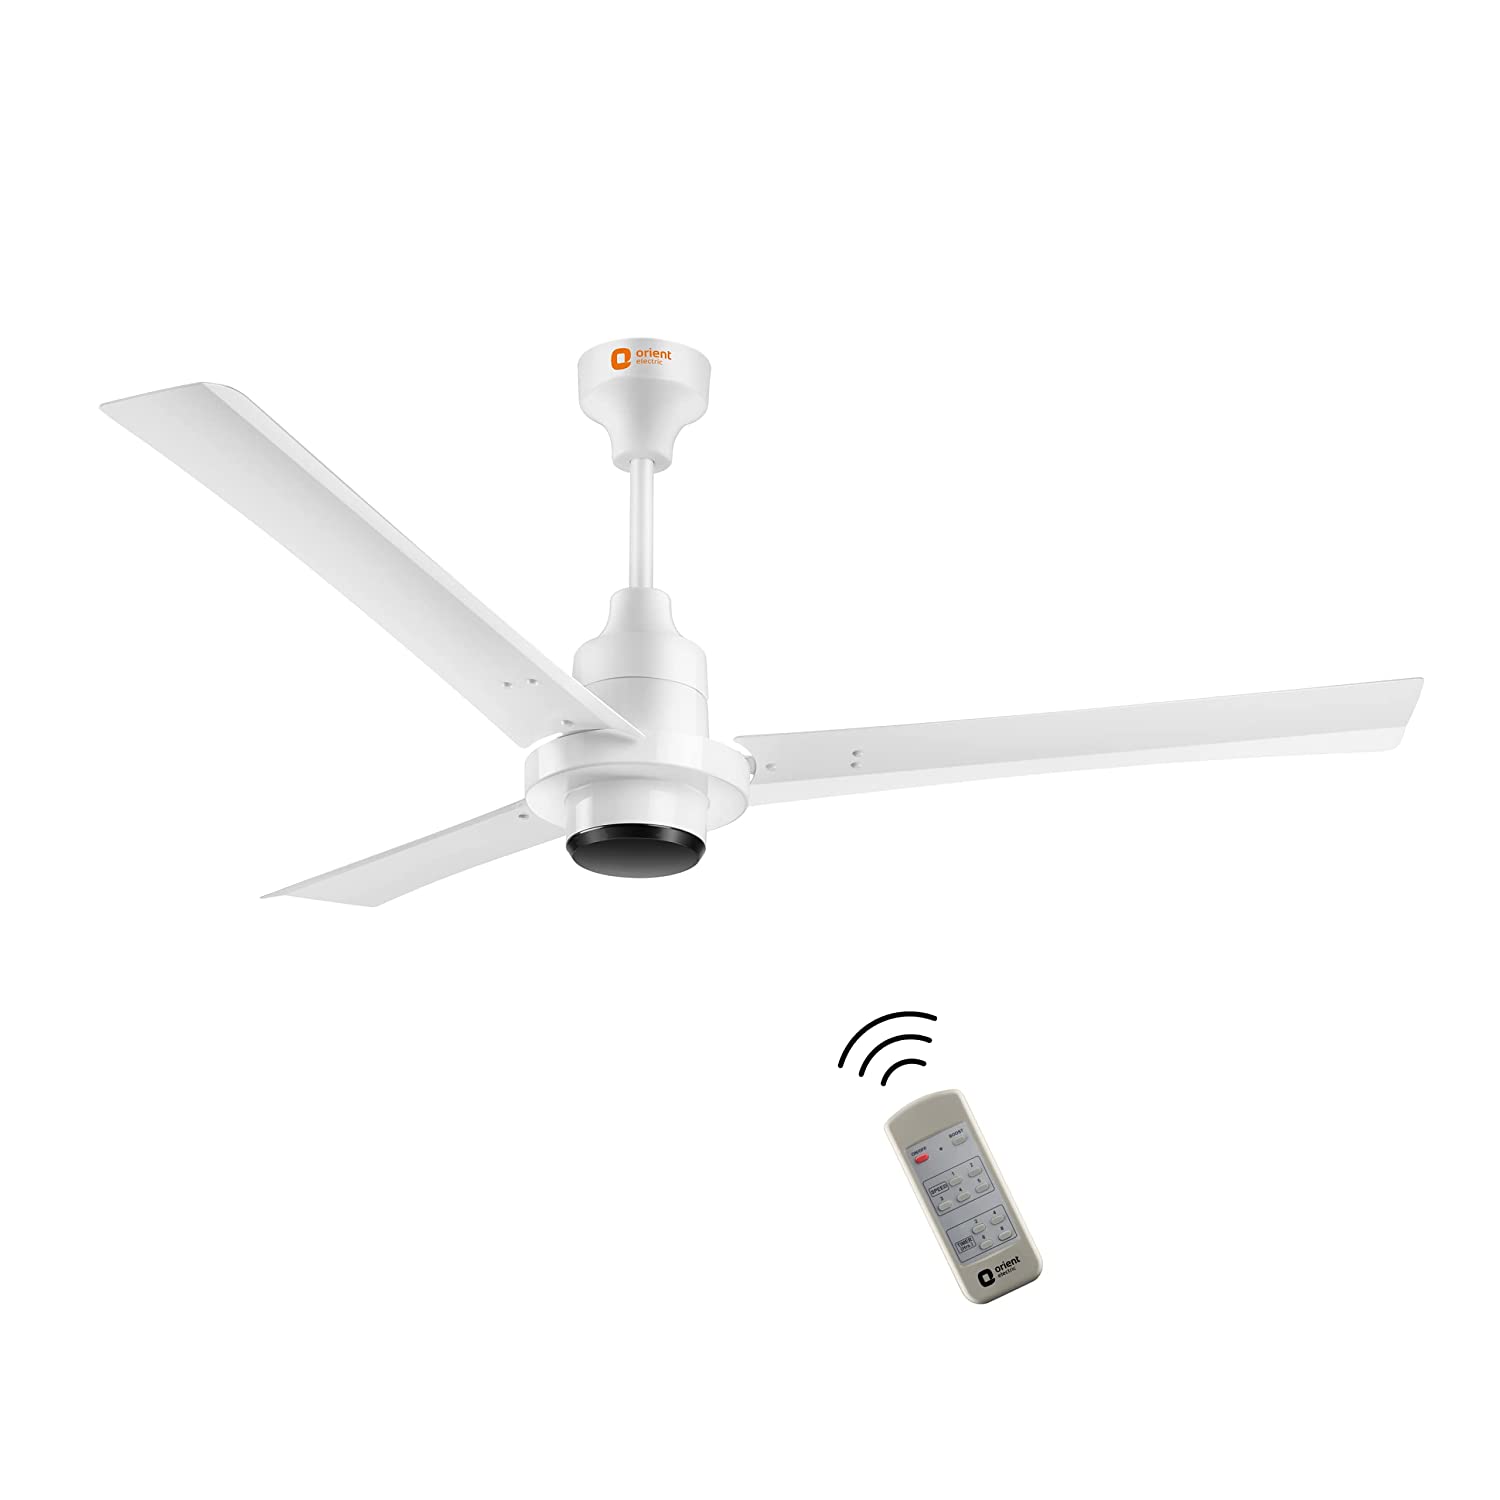 Orient Electric I-Tome BLDC Ceiling Fan